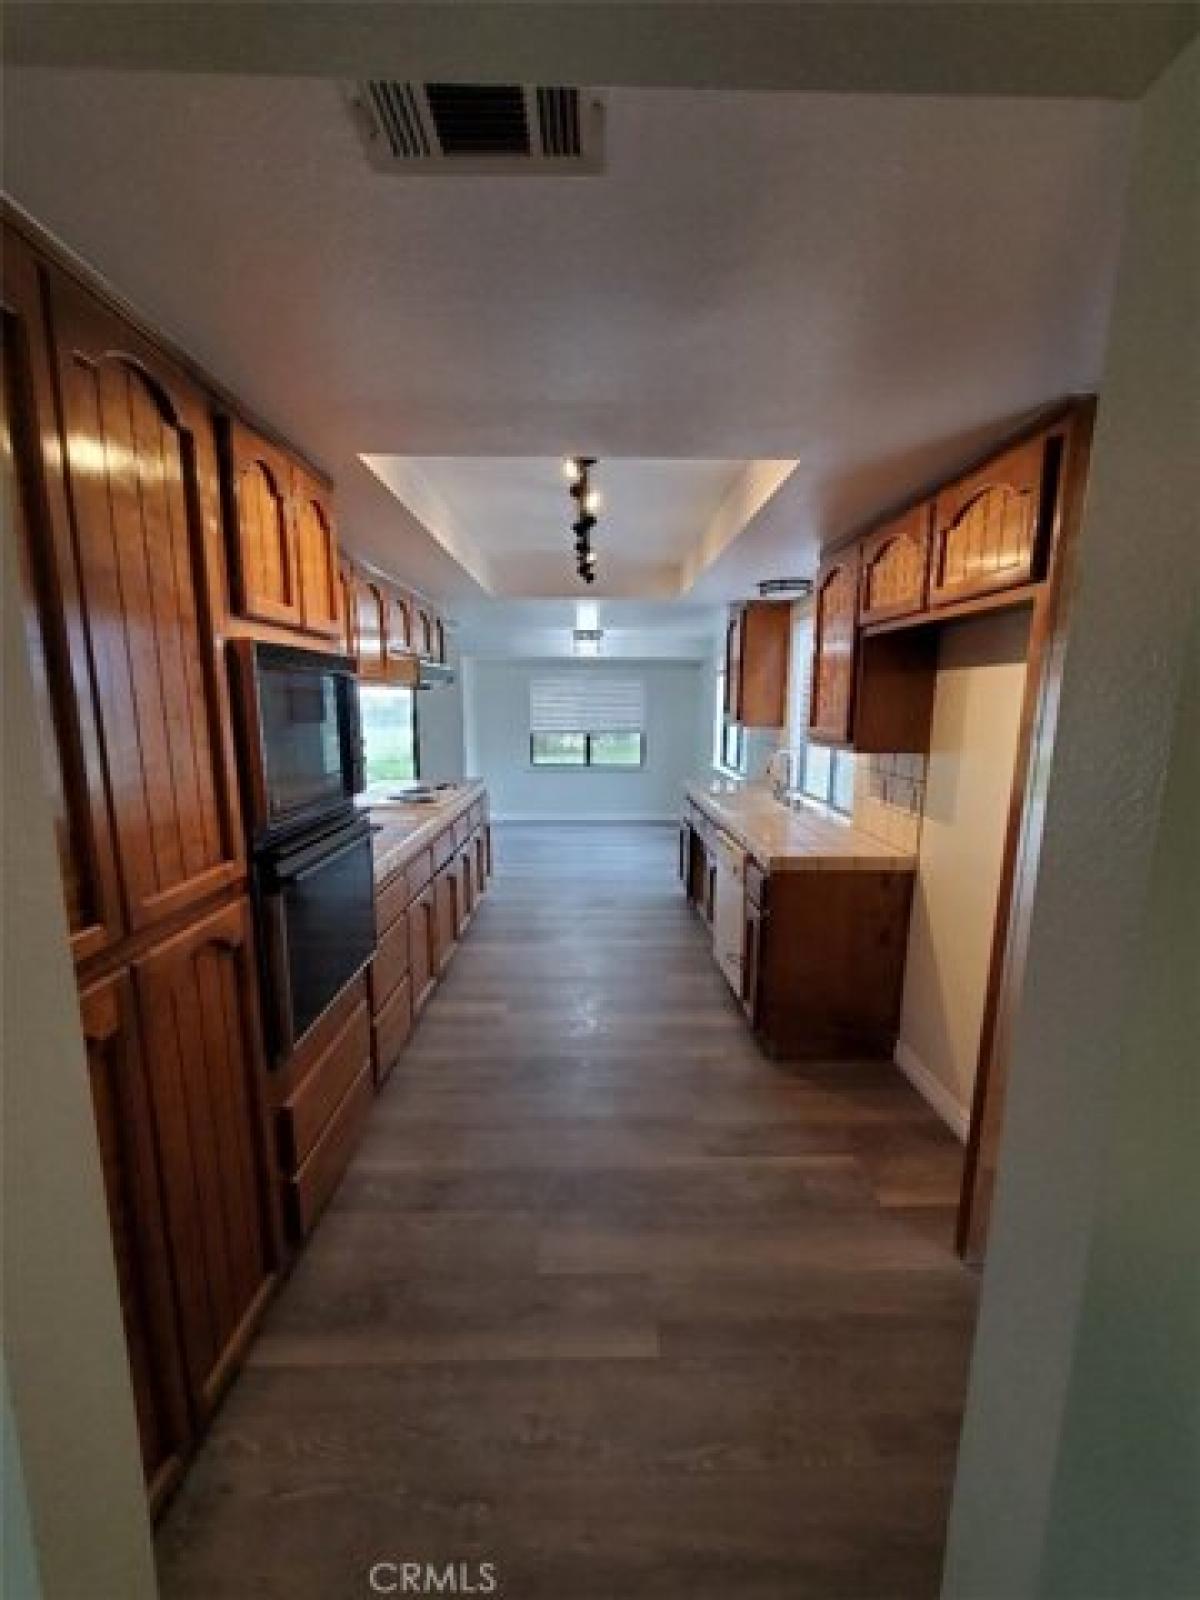 Picture of Home For Rent in Yucaipa, California, United States